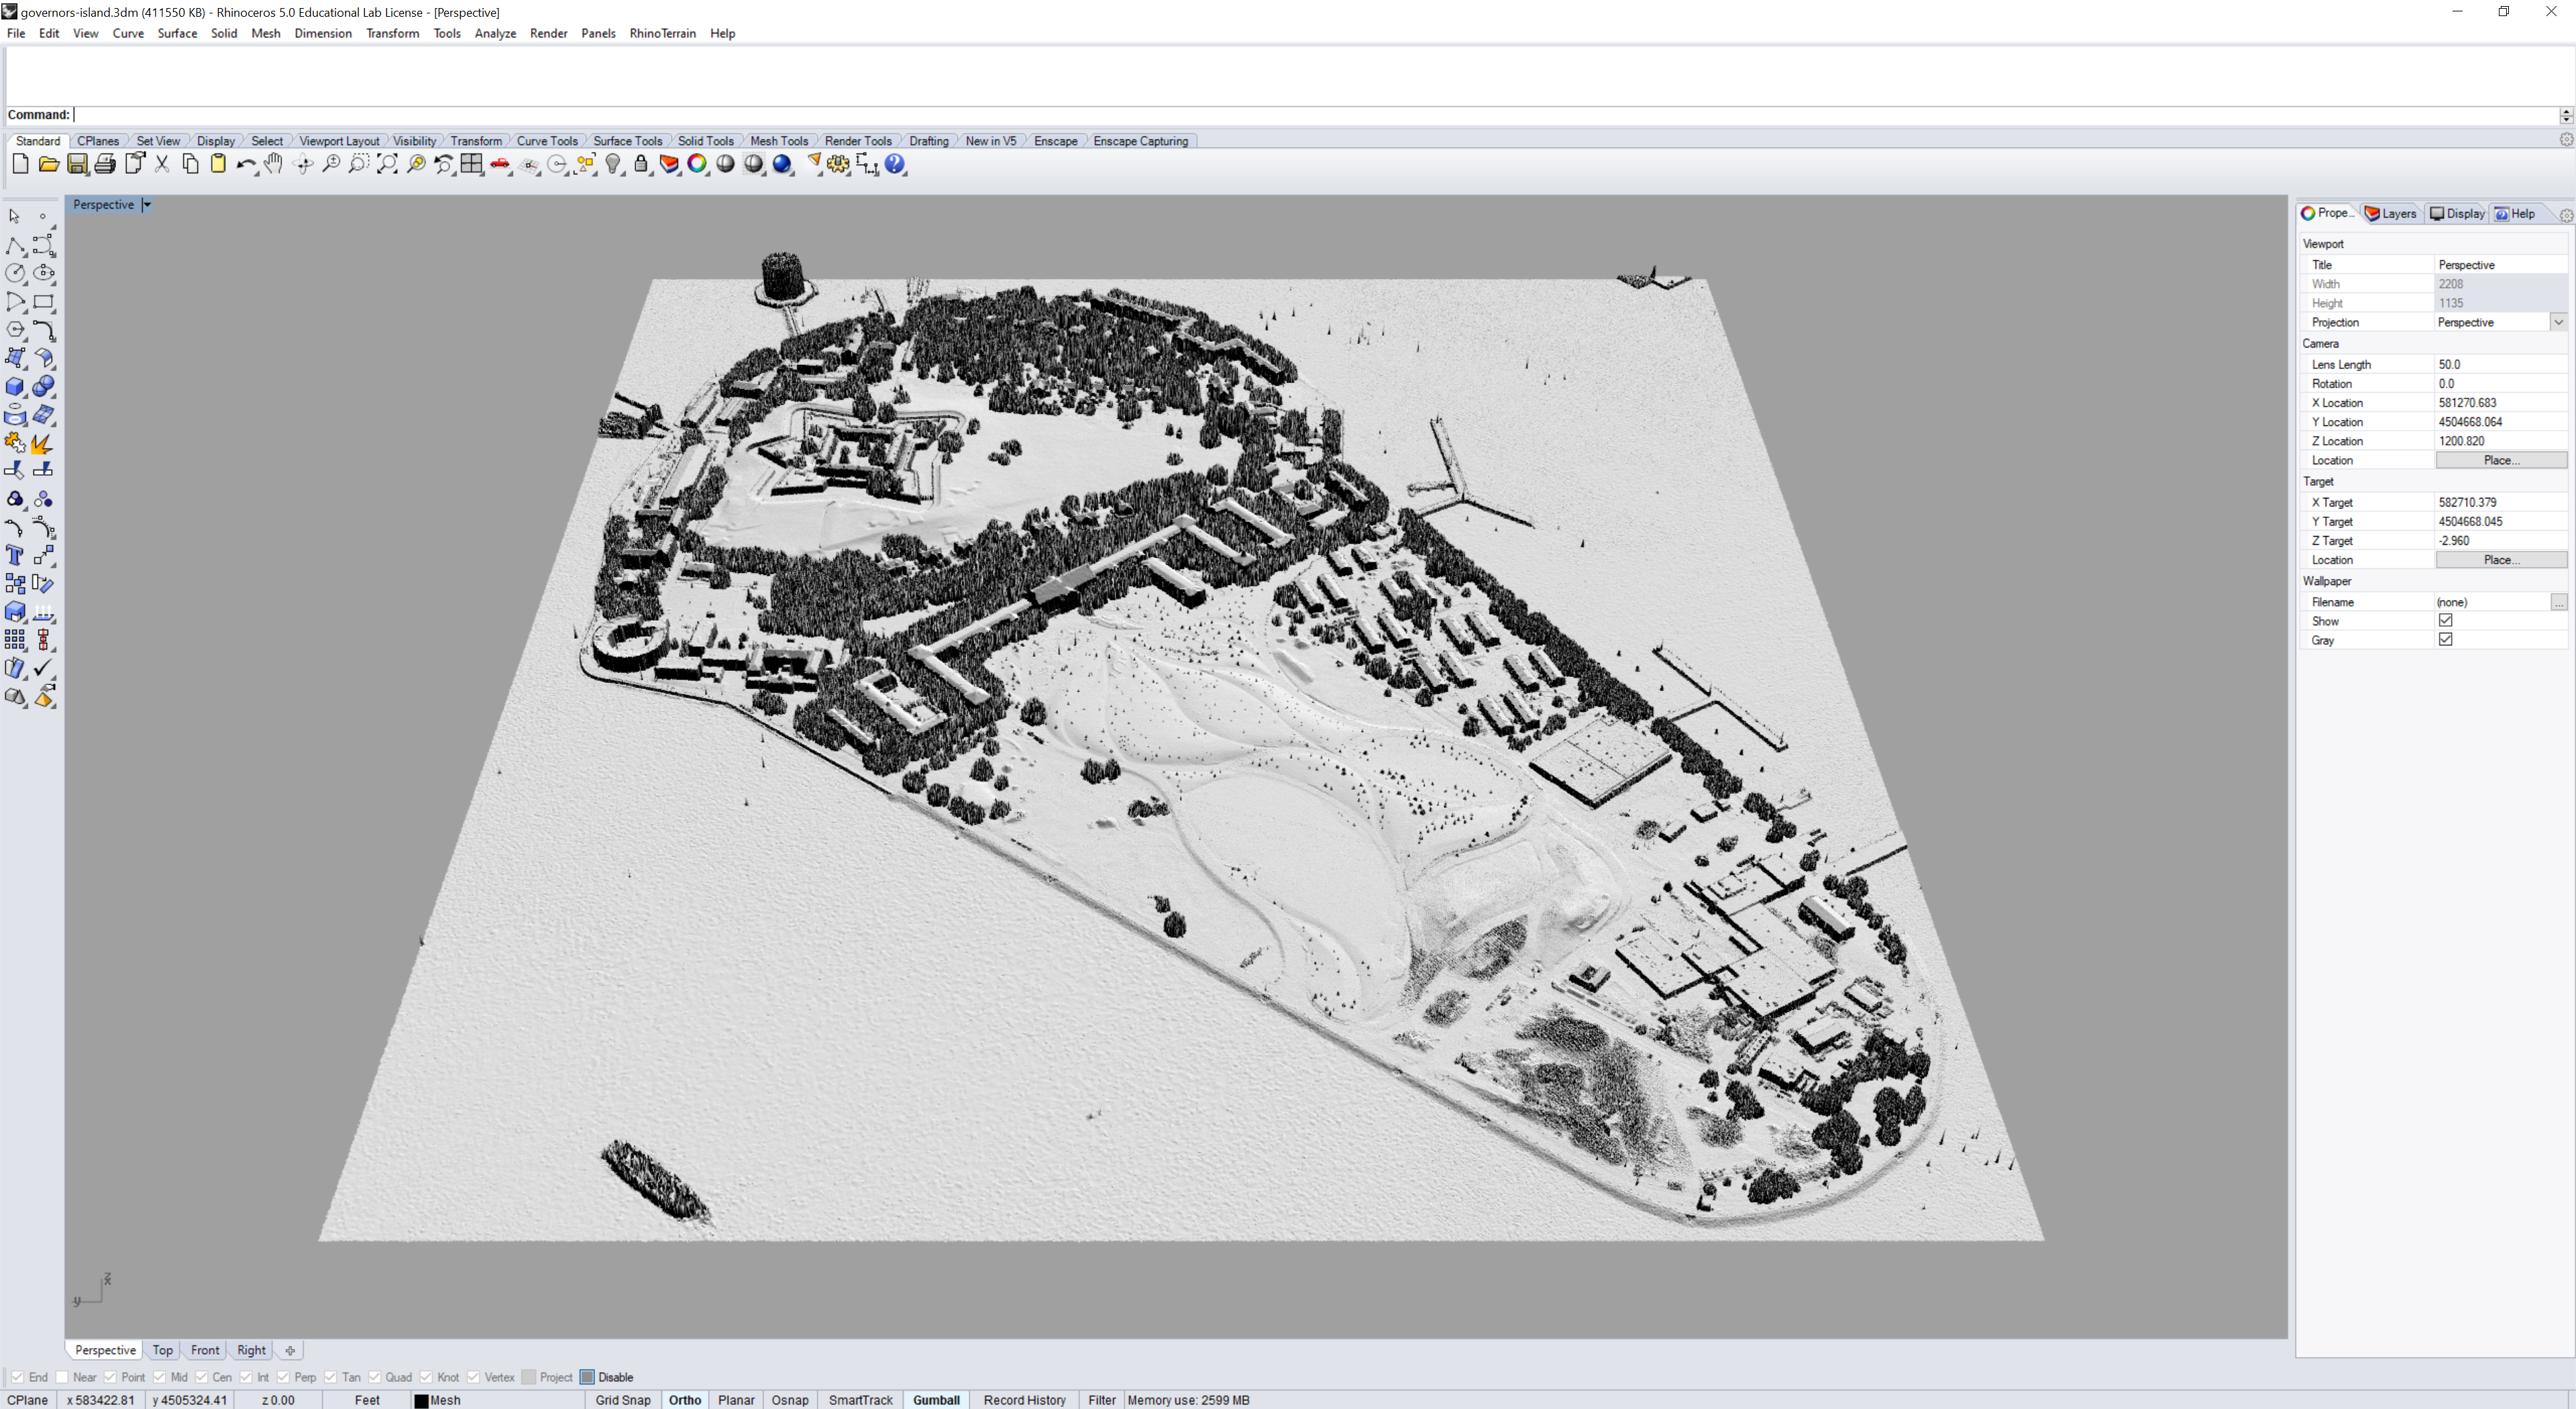 Mesh model of Governor's Island from lidar